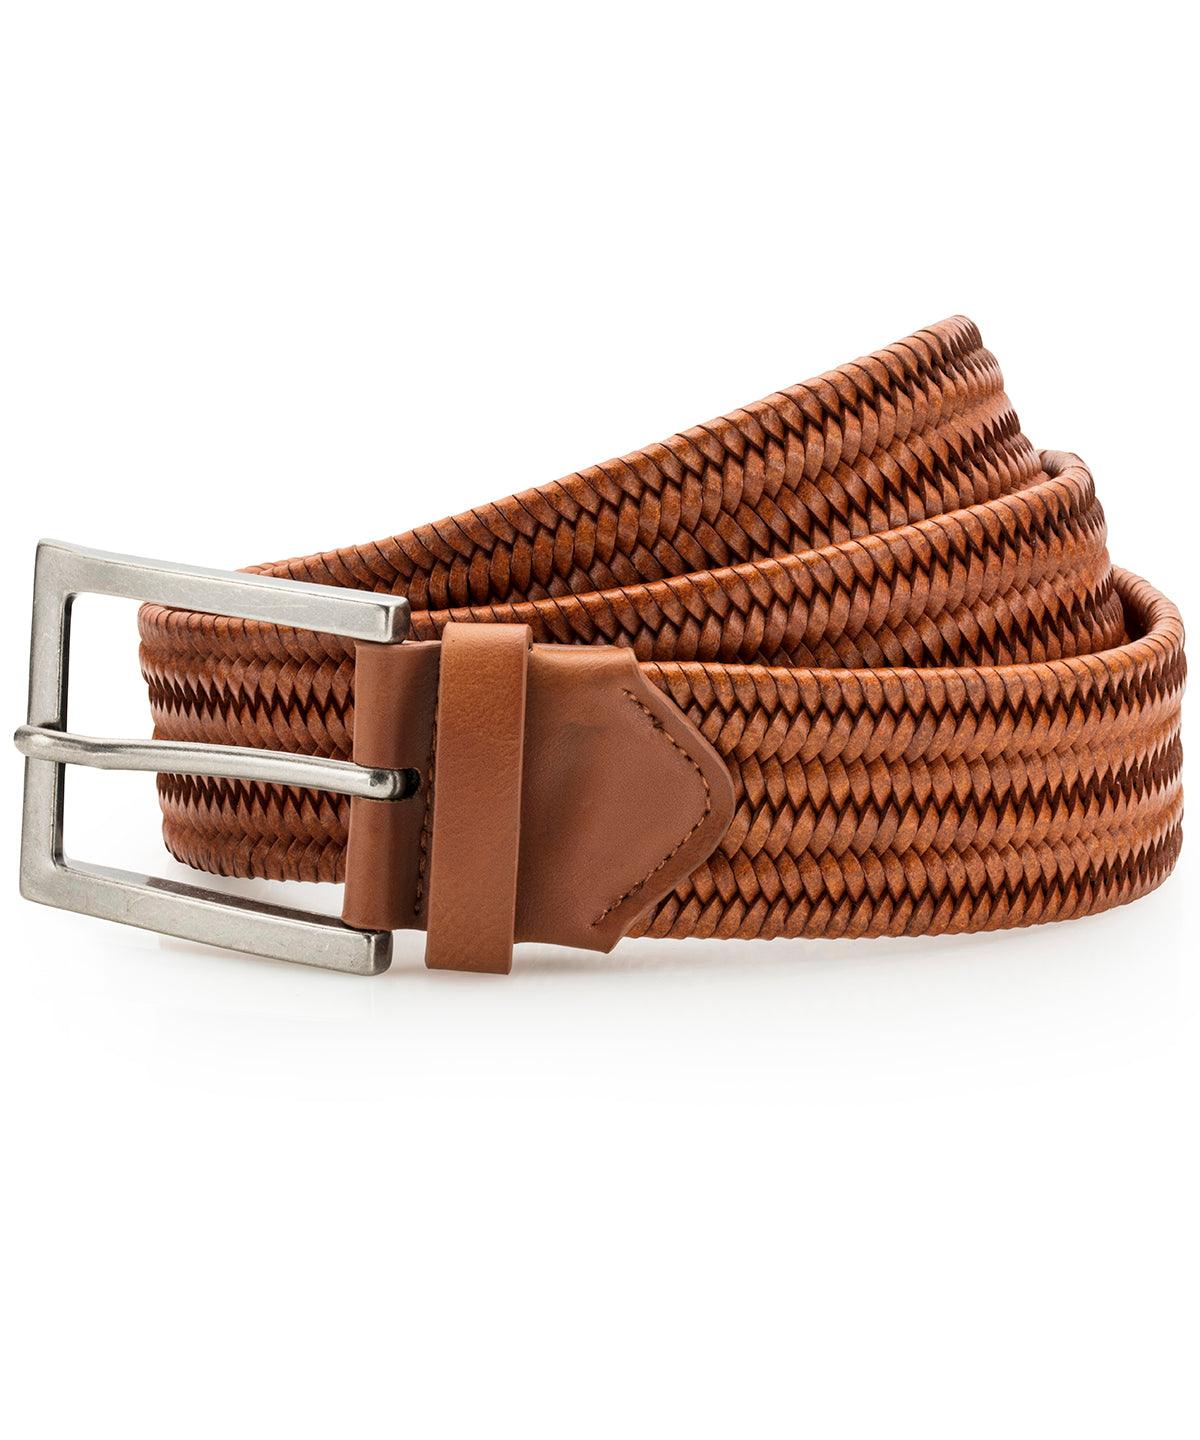 Tan - Leather braid belt Belts Asquith & Fox Gifting & Accessories, Trousers & Shorts Schoolwear Centres